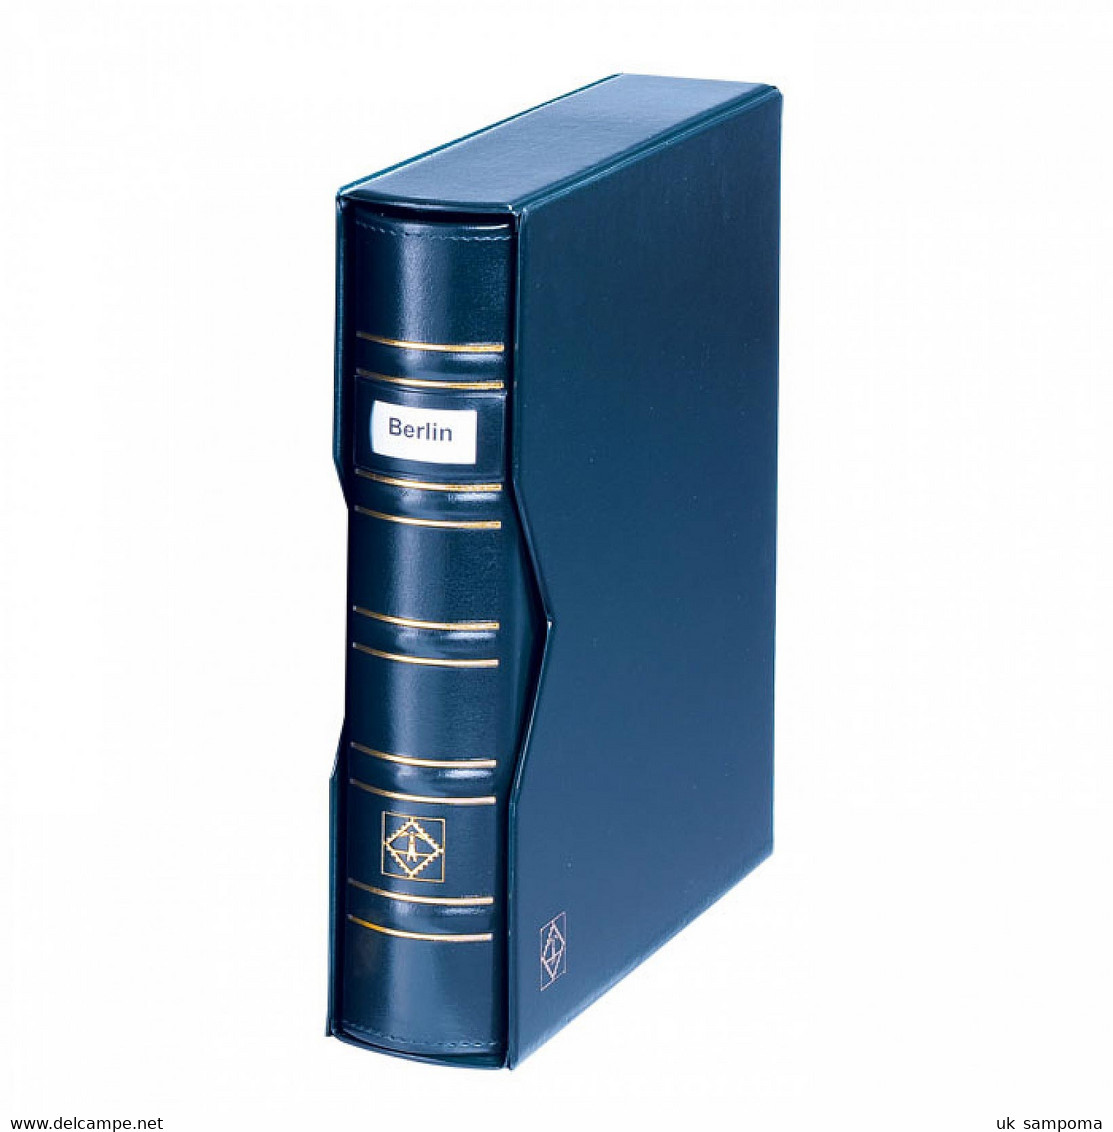 Ringbinder OPTIMA, Classic Design SIGNUM, With Labeling Field, Incl. Slipcase, Blue - Groot Formaat, Zwarte Pagina